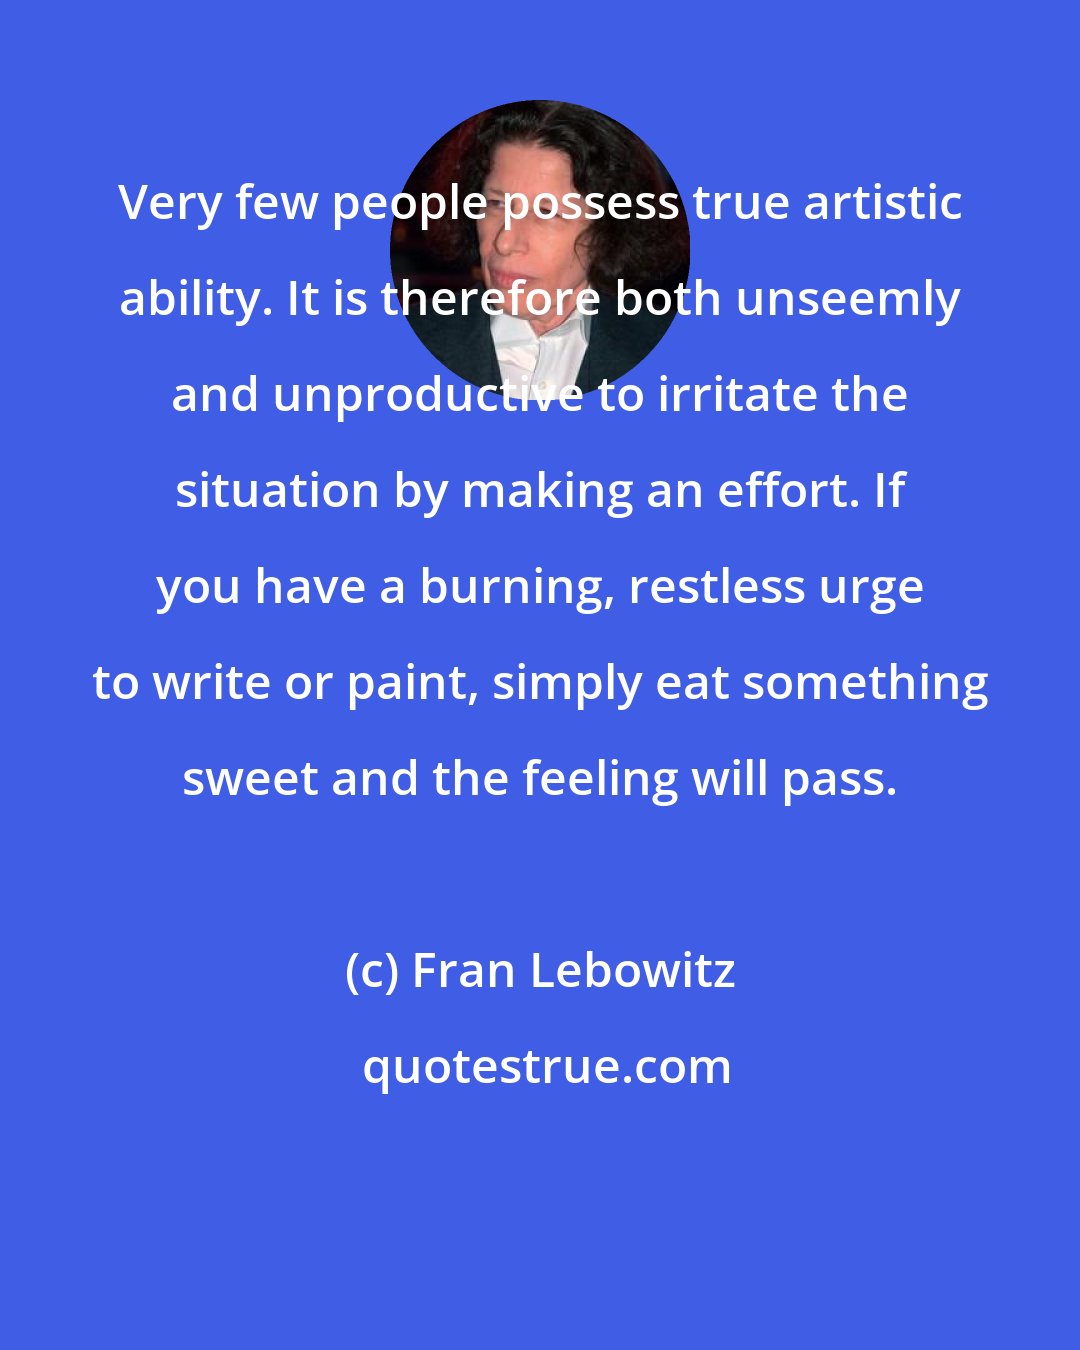 Fran Lebowitz: Very few people possess true artistic ability. It is therefore both unseemly and unproductive to irritate the situation by making an effort. If you have a burning, restless urge to write or paint, simply eat something sweet and the feeling will pass.